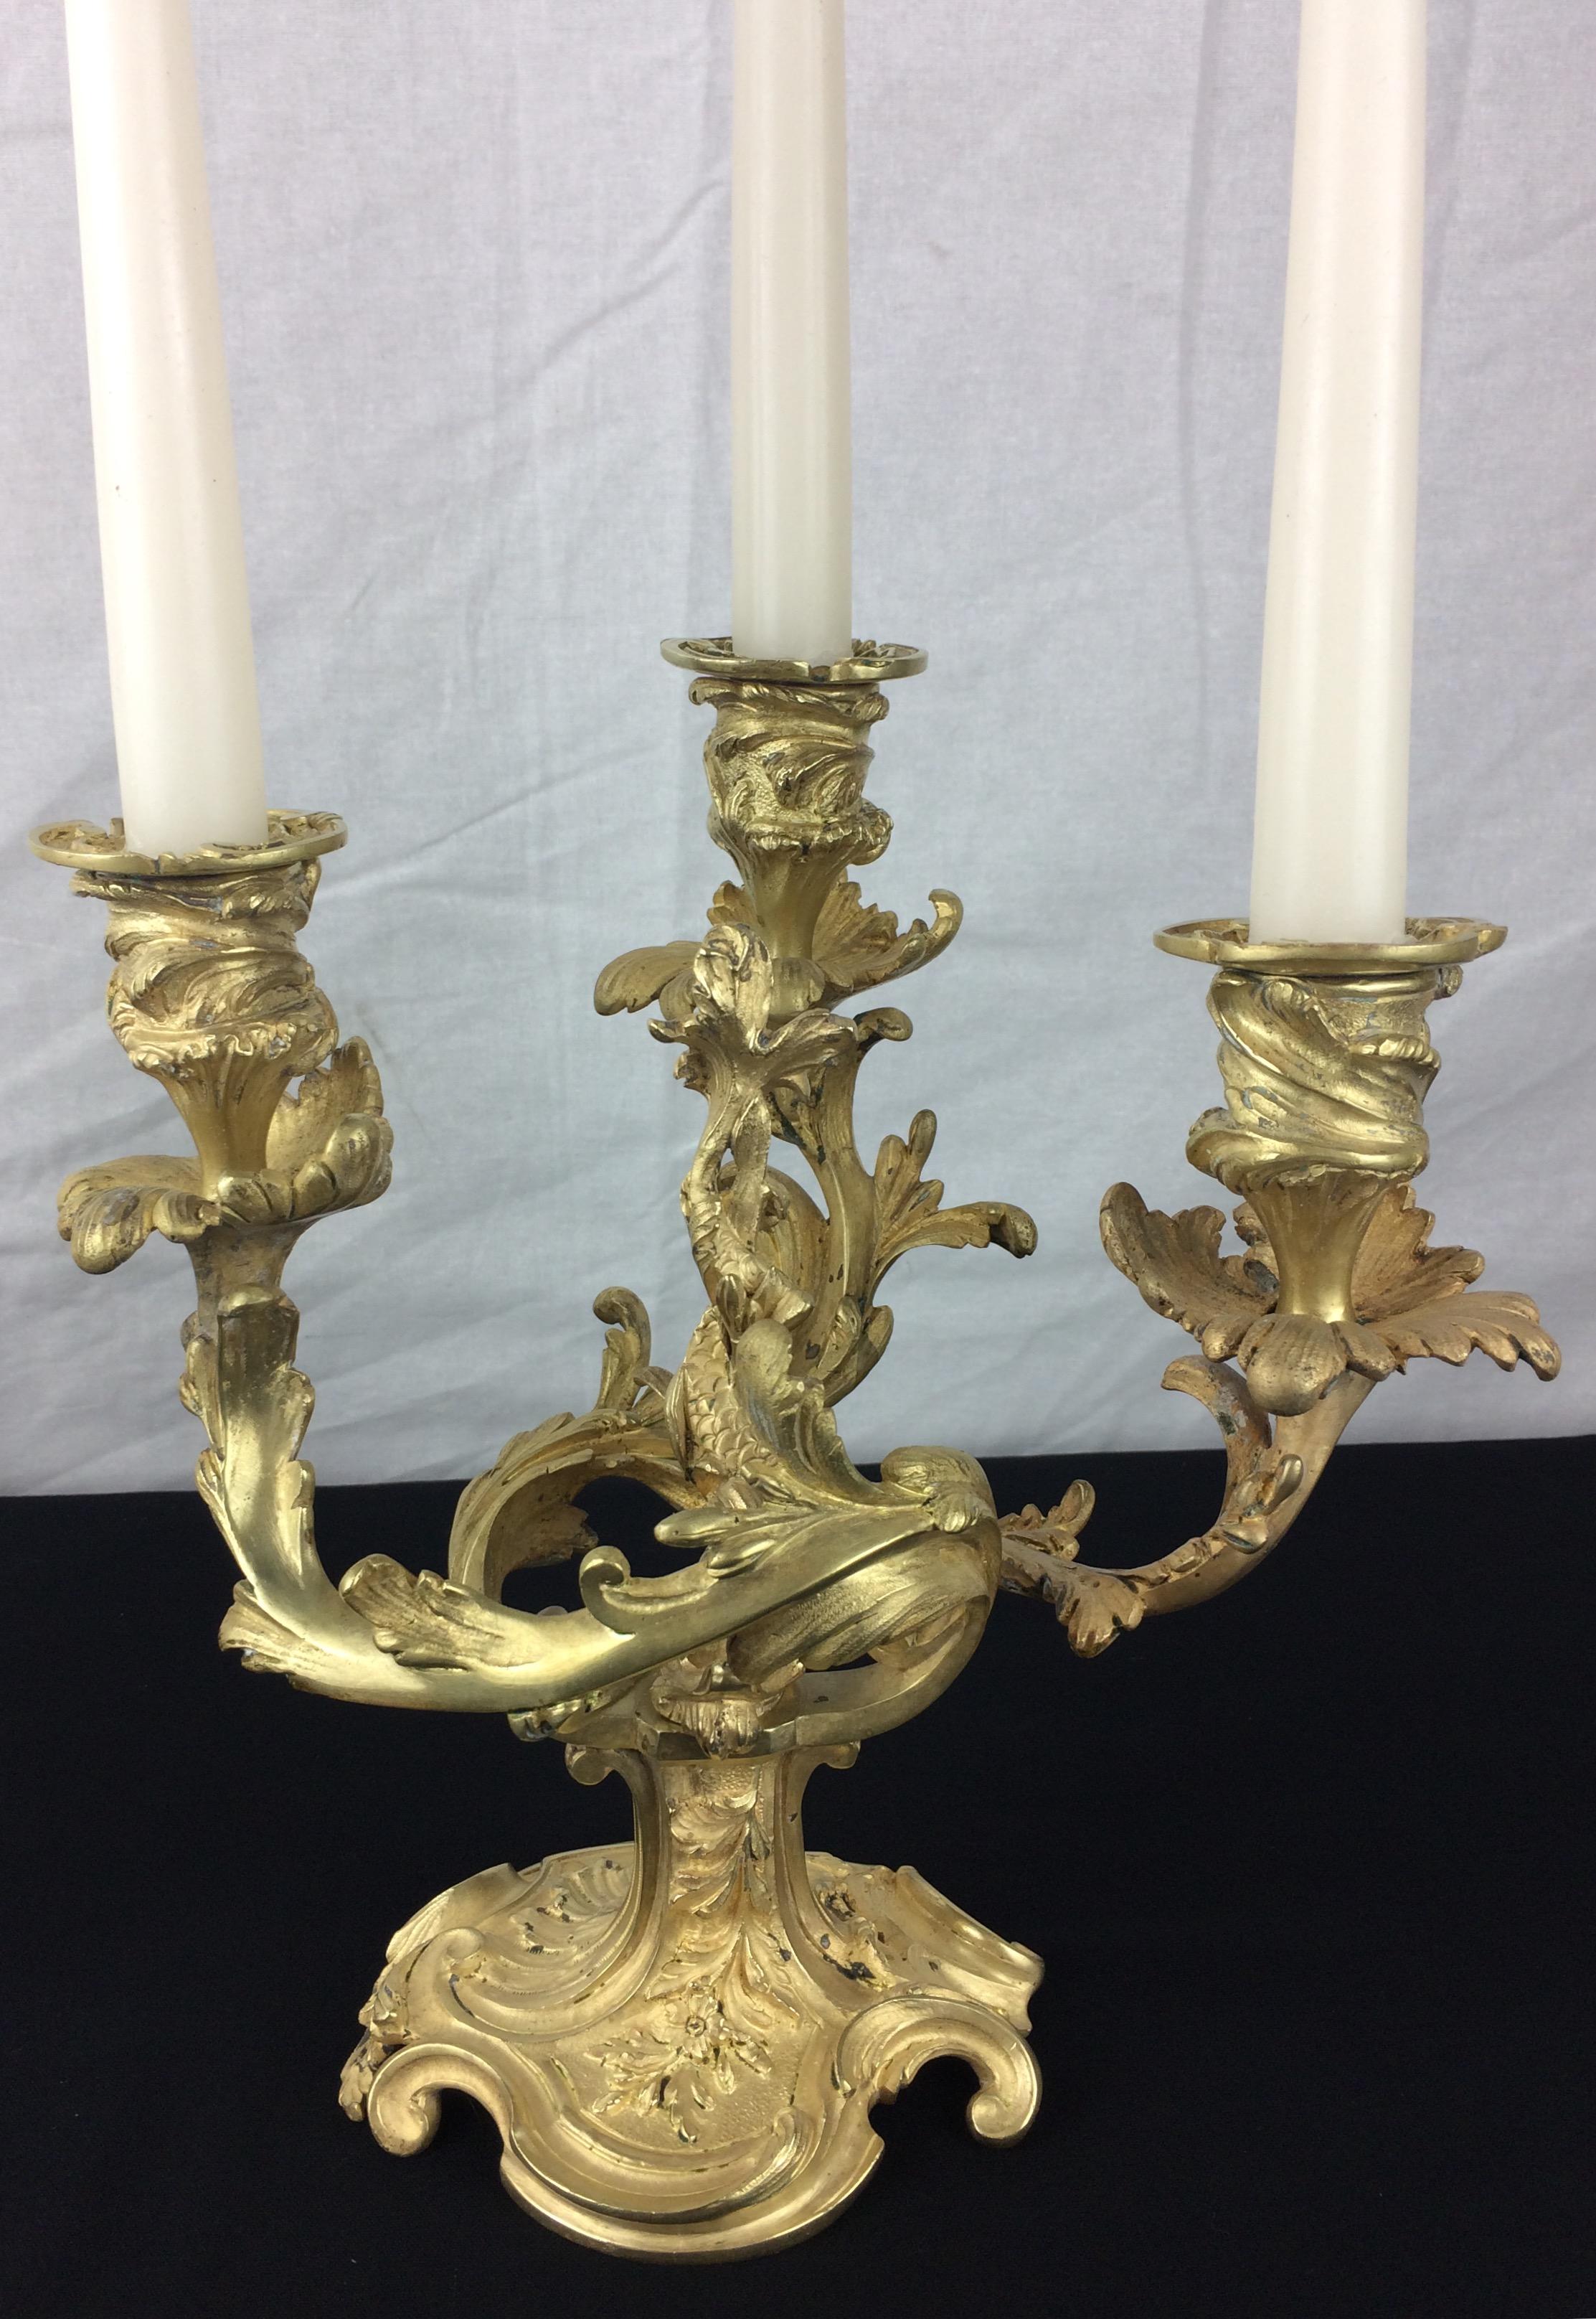 A very fine quality pair of 19th Century French Bronze Candelabras in the Napoleon III Style.  Original gilding on these beautiful bronze rocaille or rococo candelabras. 

The typical Napoleon III details are captivating, see detailed photos.